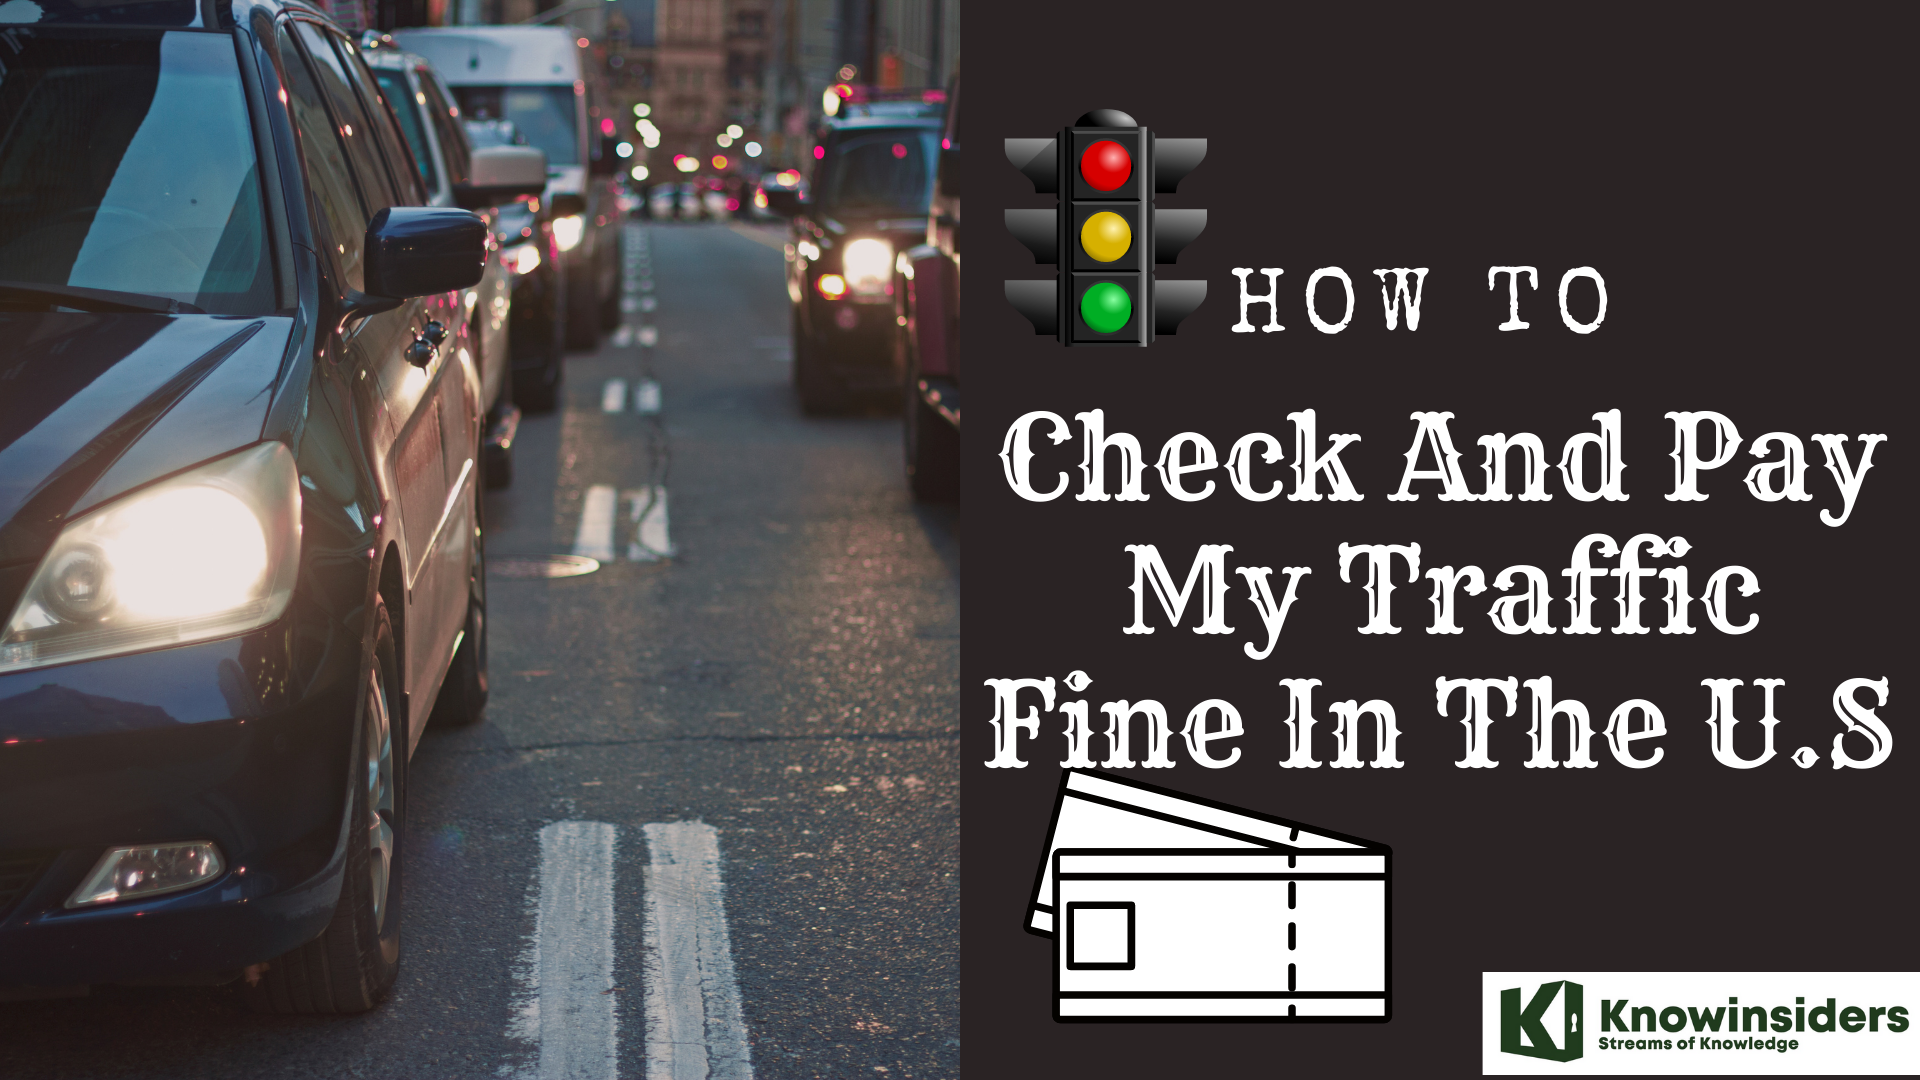 How To Check and Pay The Traffic Fine Online In The U.S